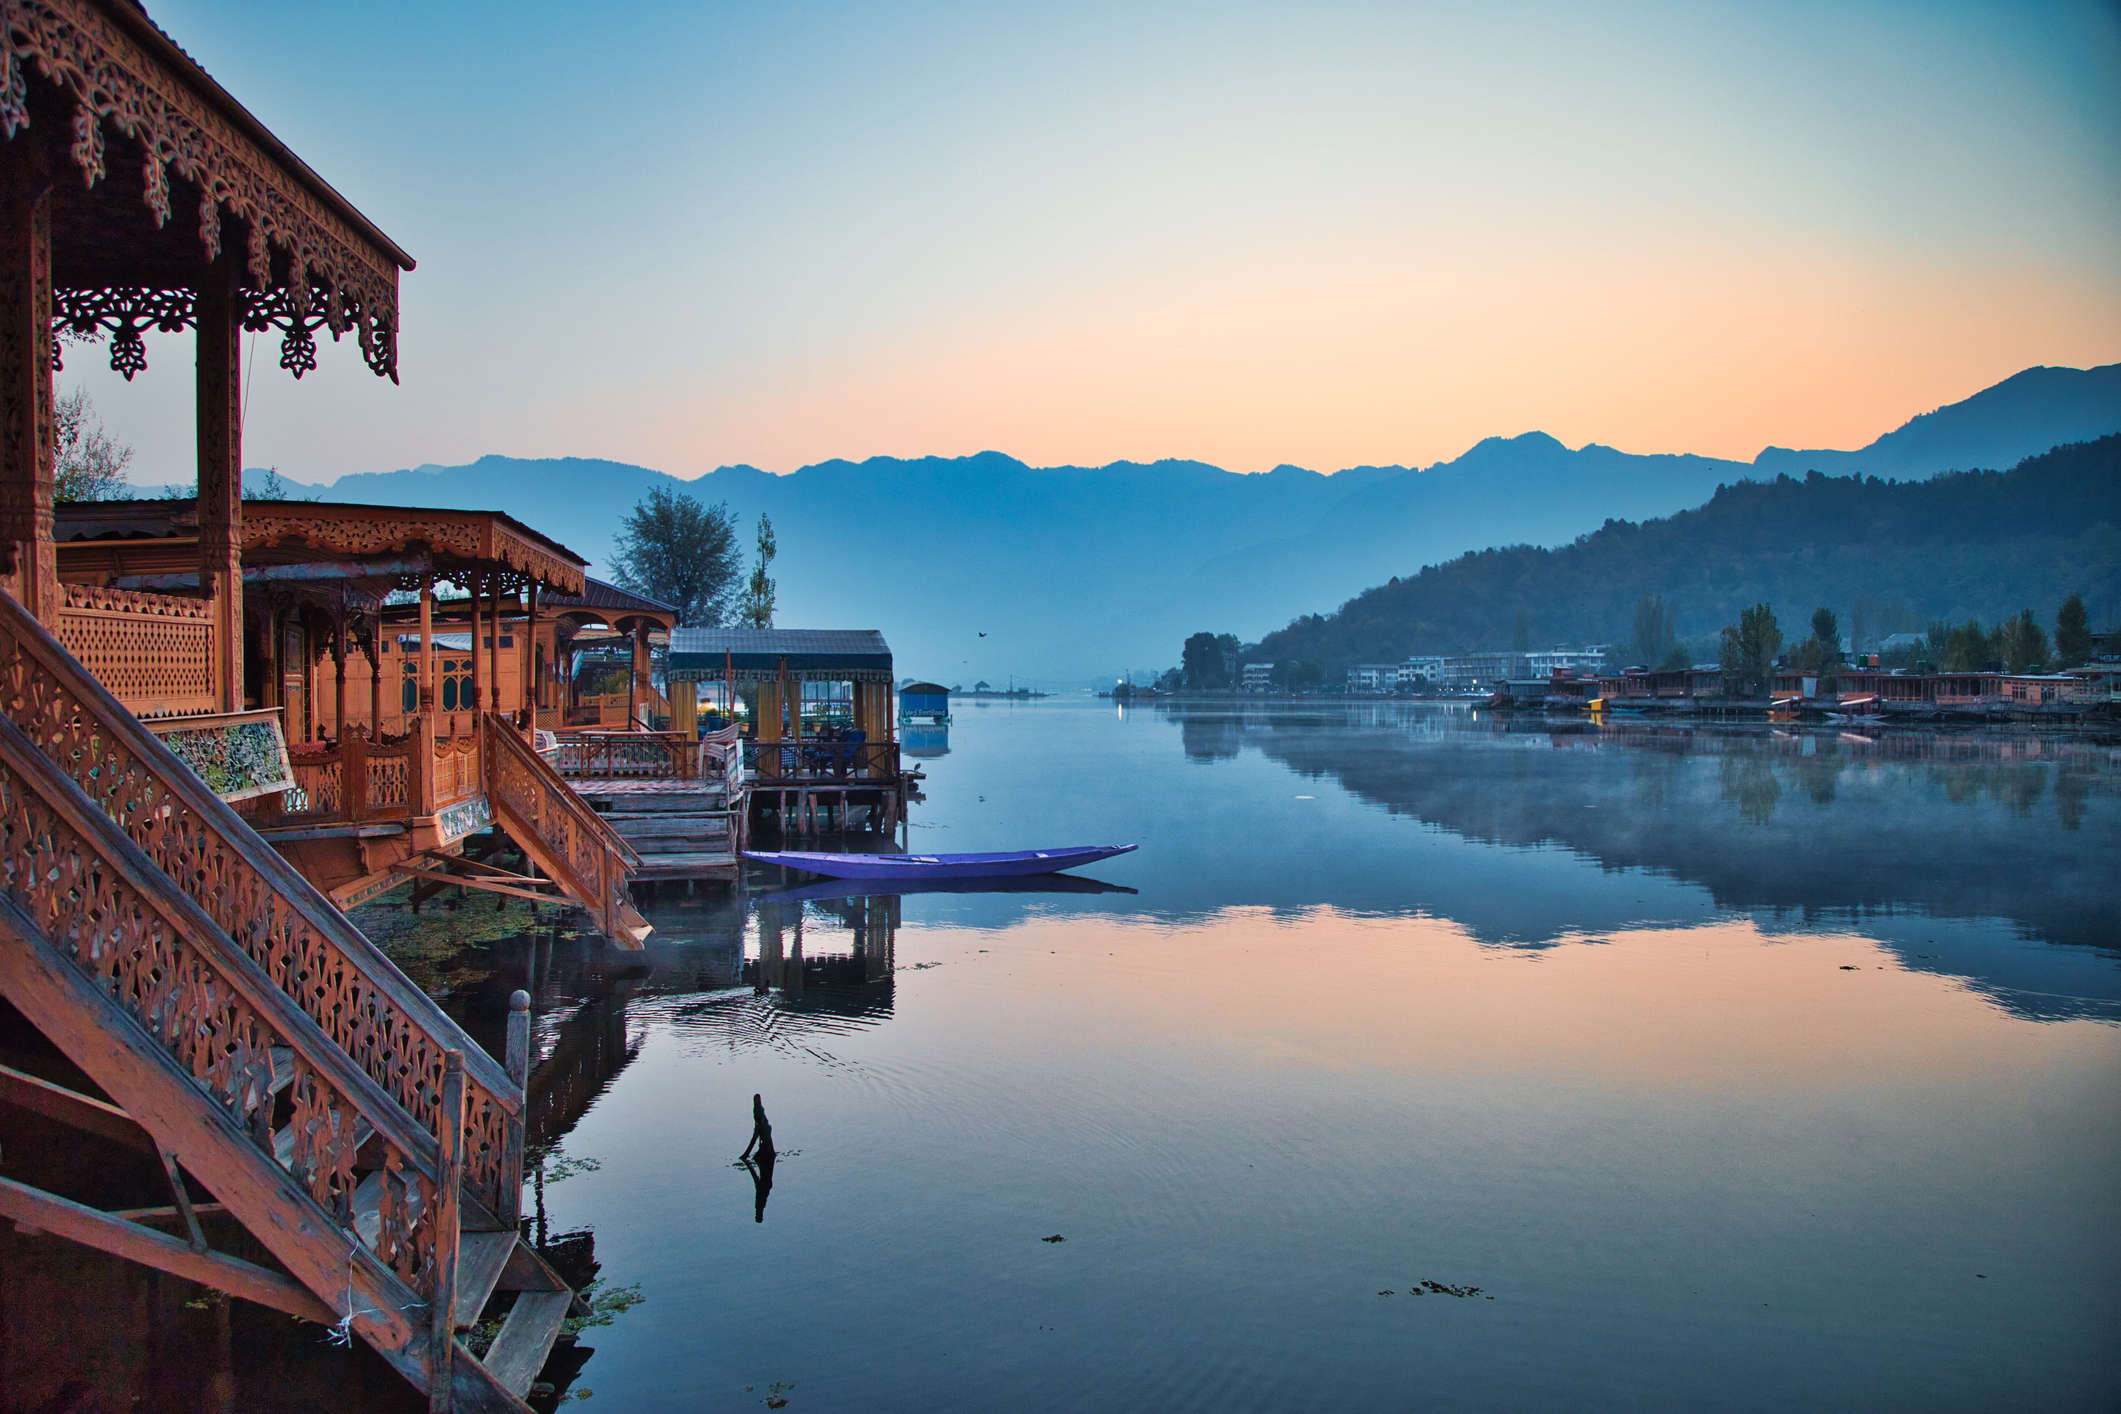 Kashmir to get a boost in tourism with direct, evening flights